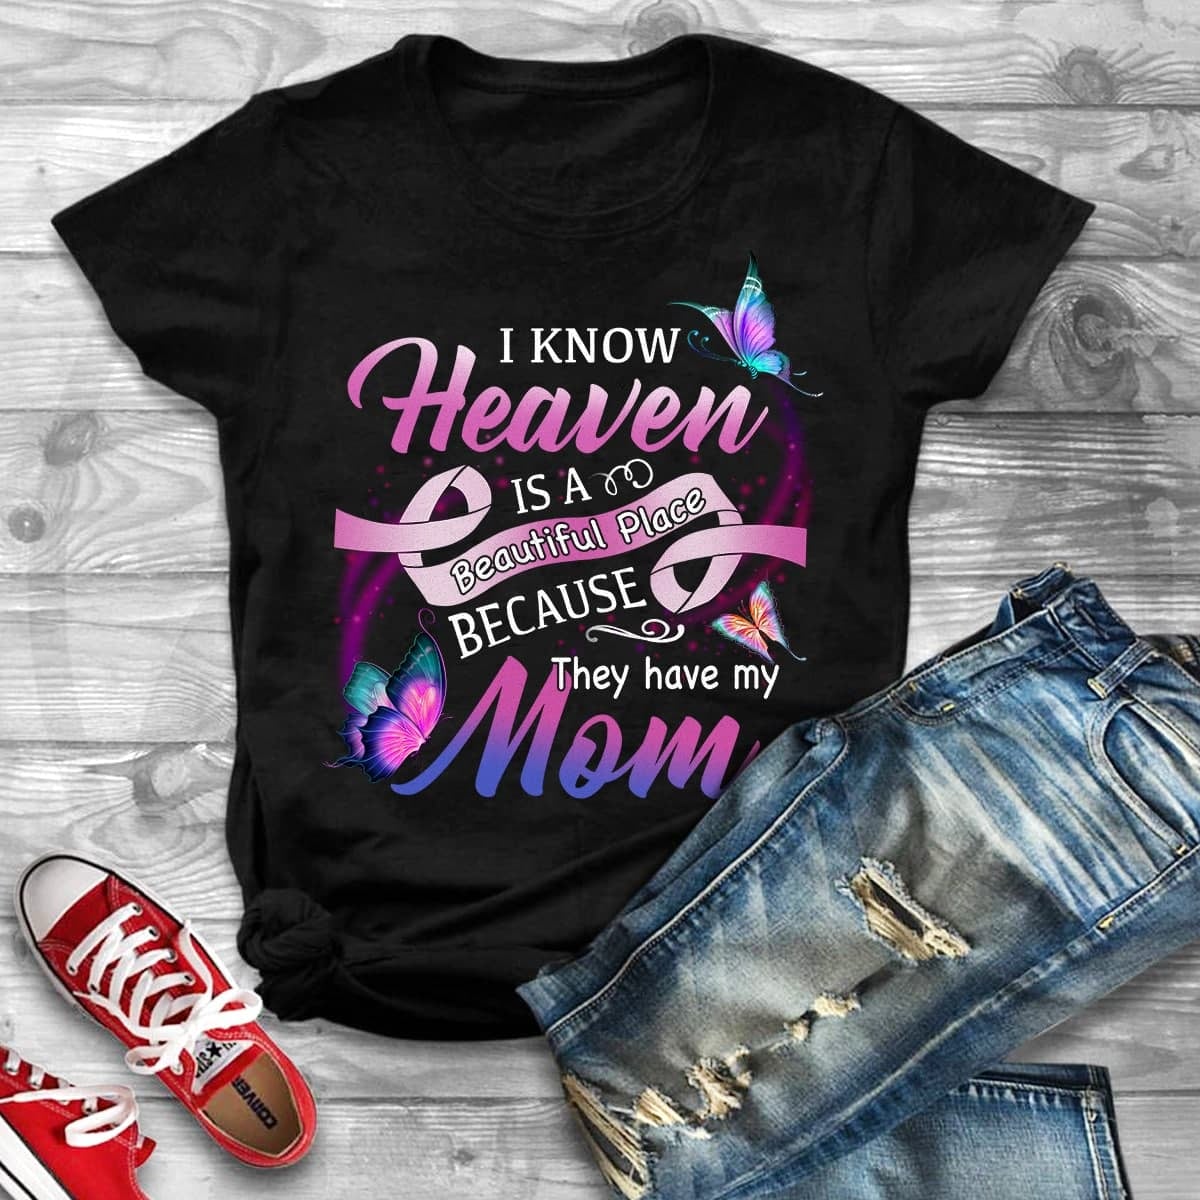 I know heaven is a beautiful place because they have my mom - Mother in haven, heaven beautiful place